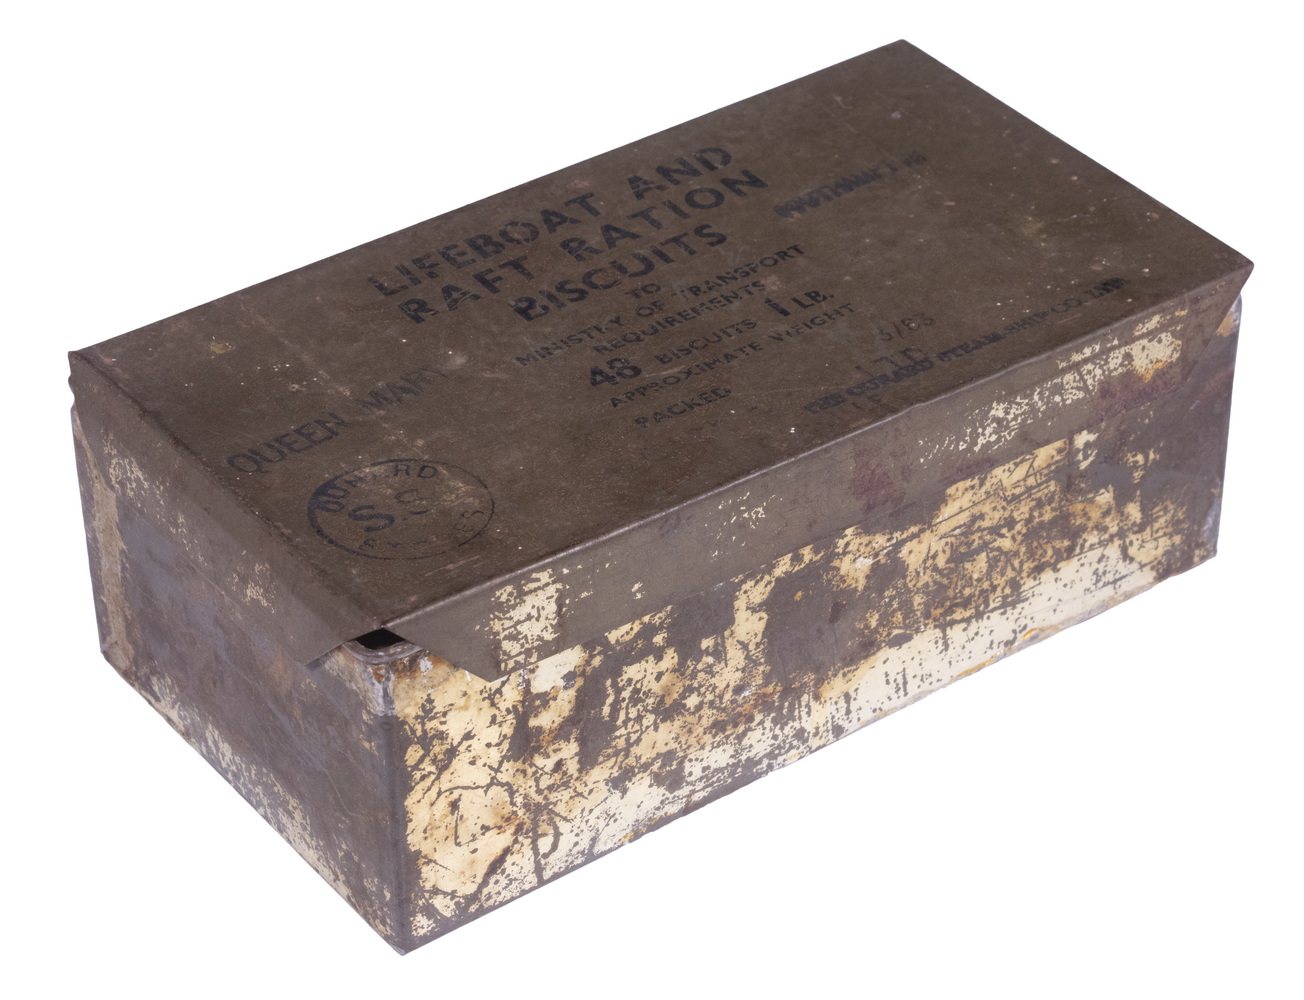 RMS QUEEN MARY LIFEBOATS RATION 3b66c9